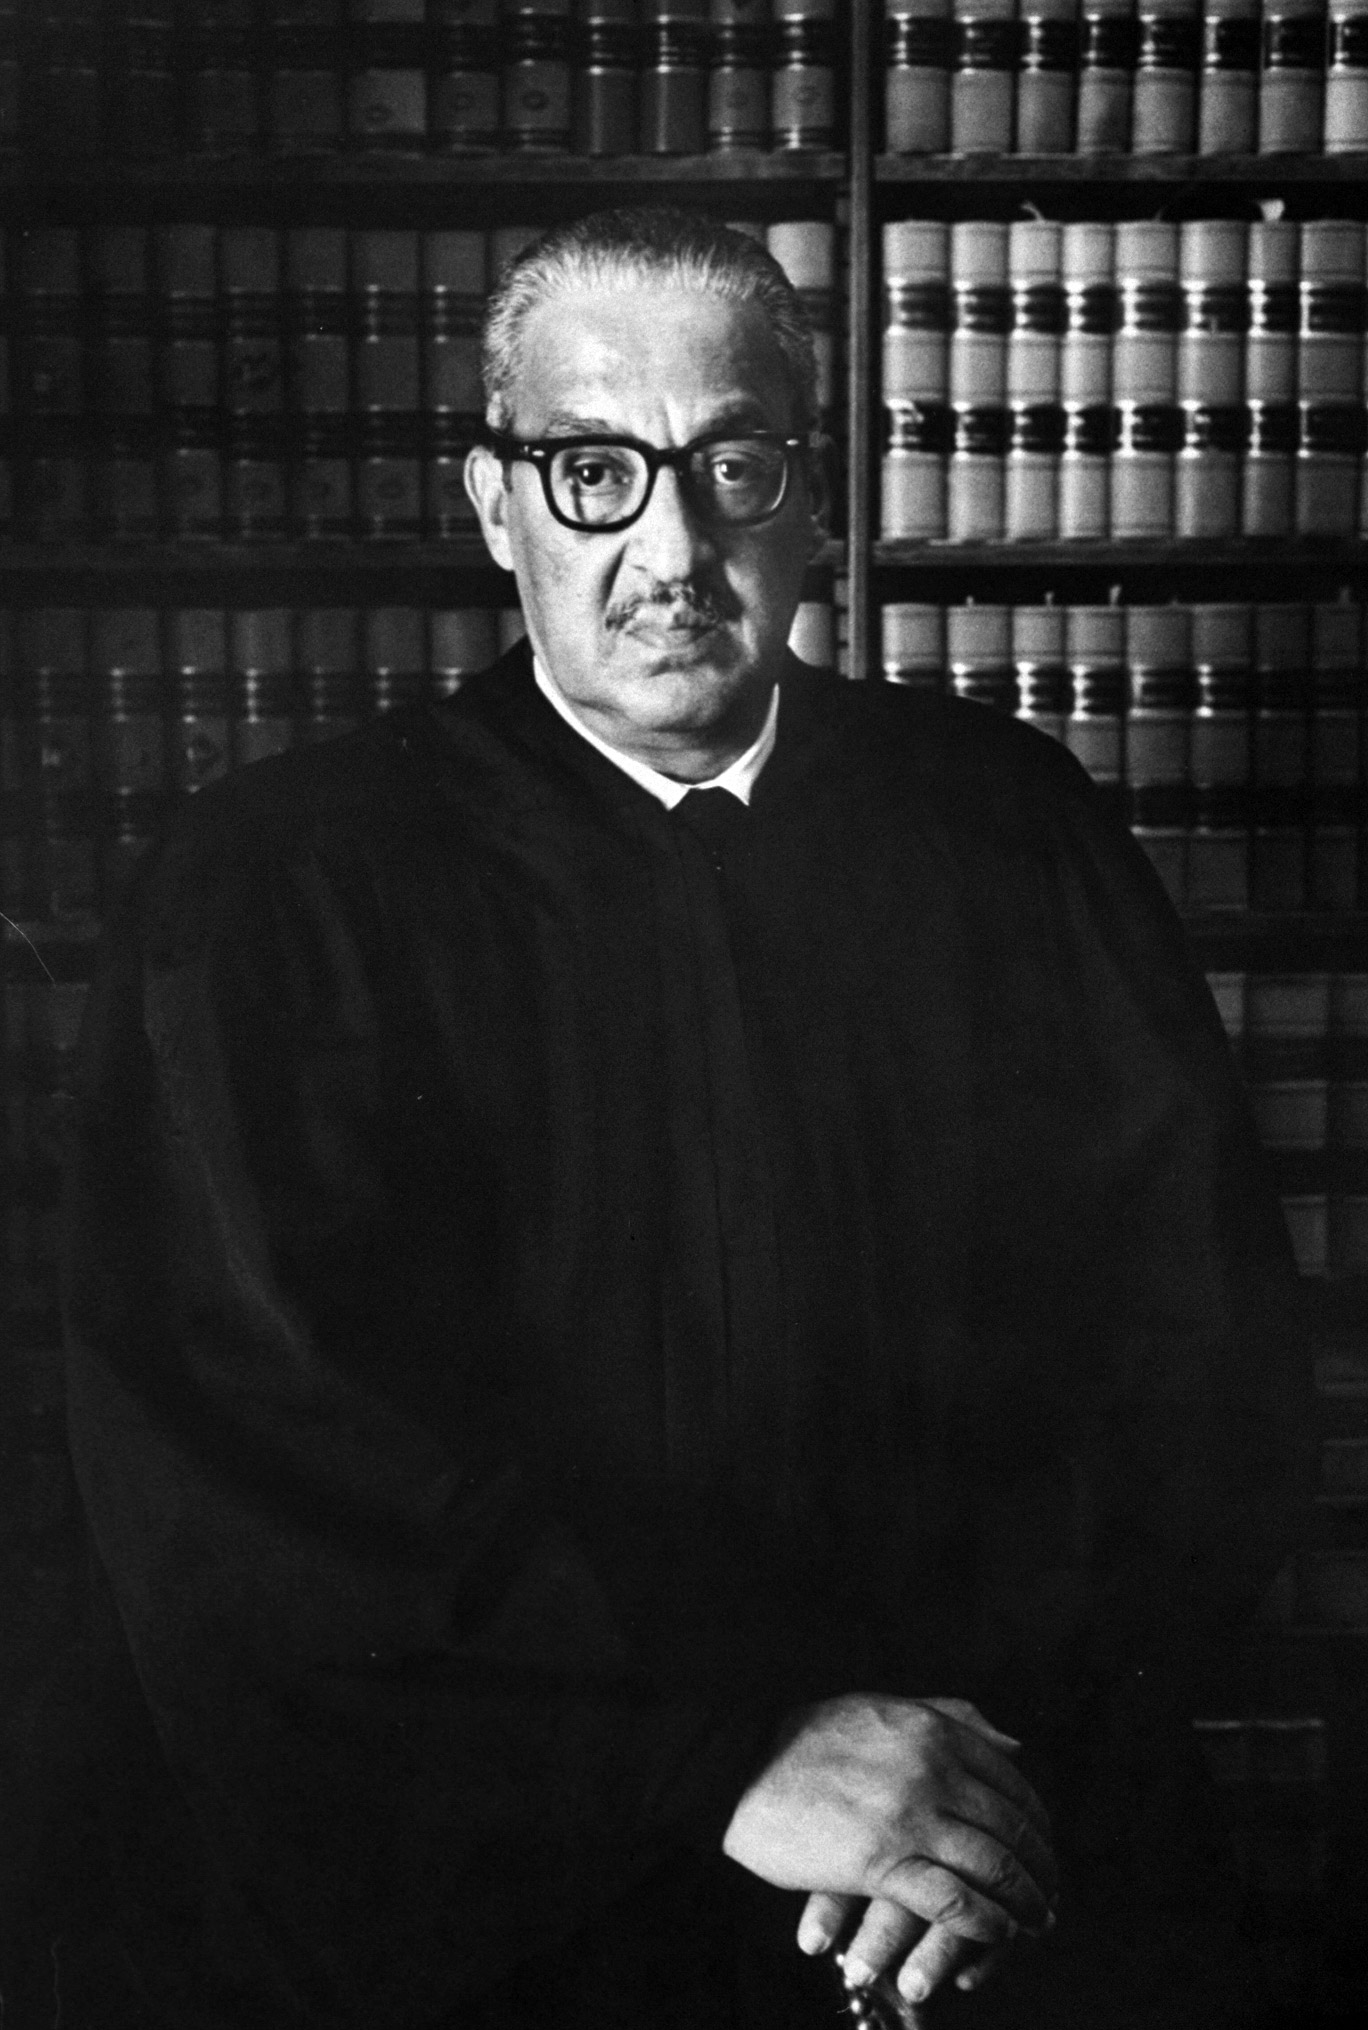 US Supreme Court Justice Thurgood Marshall in his chambers, 1967.